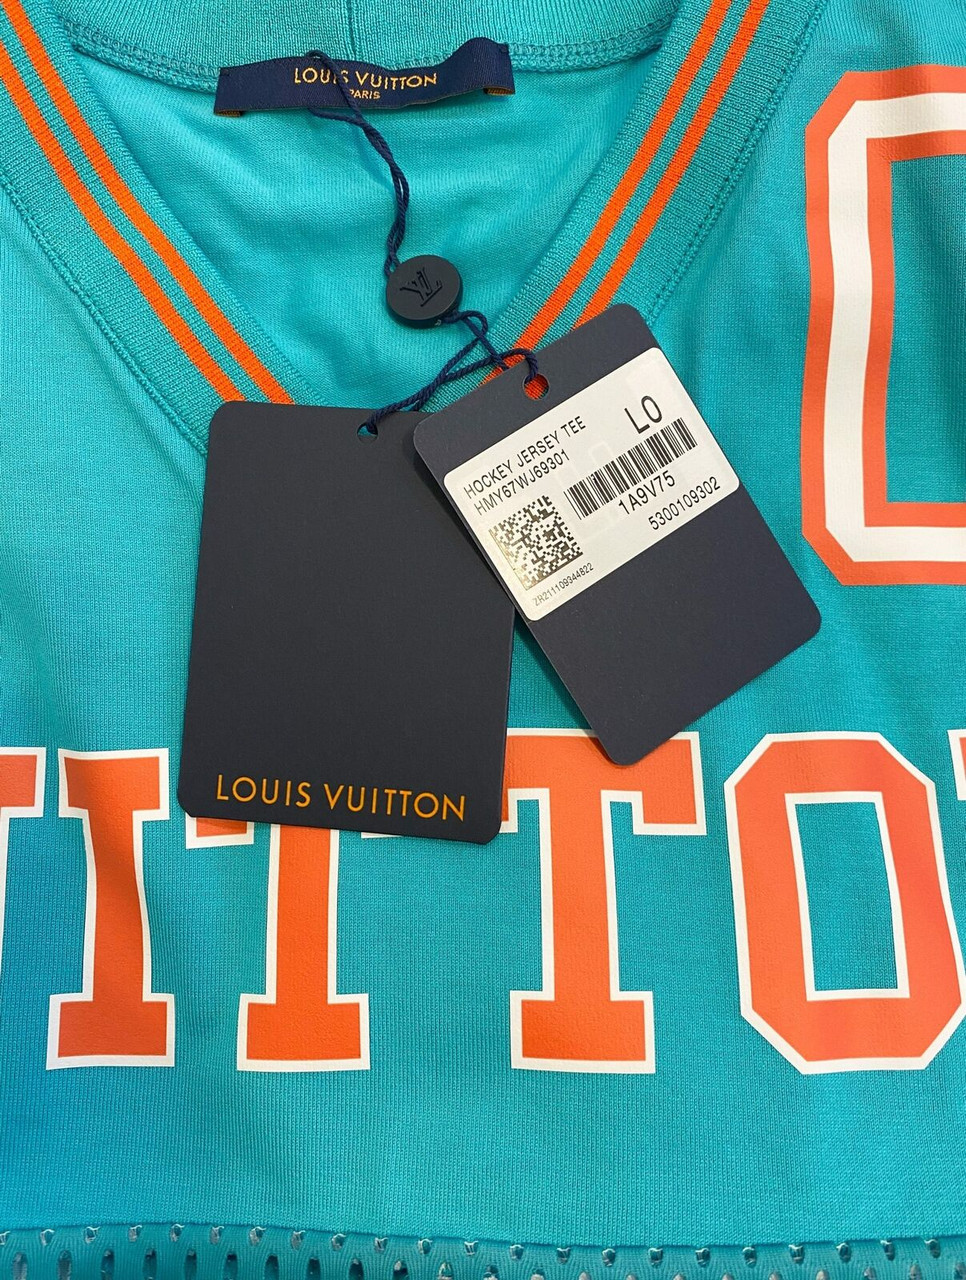 Louis Vuitton limited edition “Hockey Jersey T-Shirt” $1,090.00